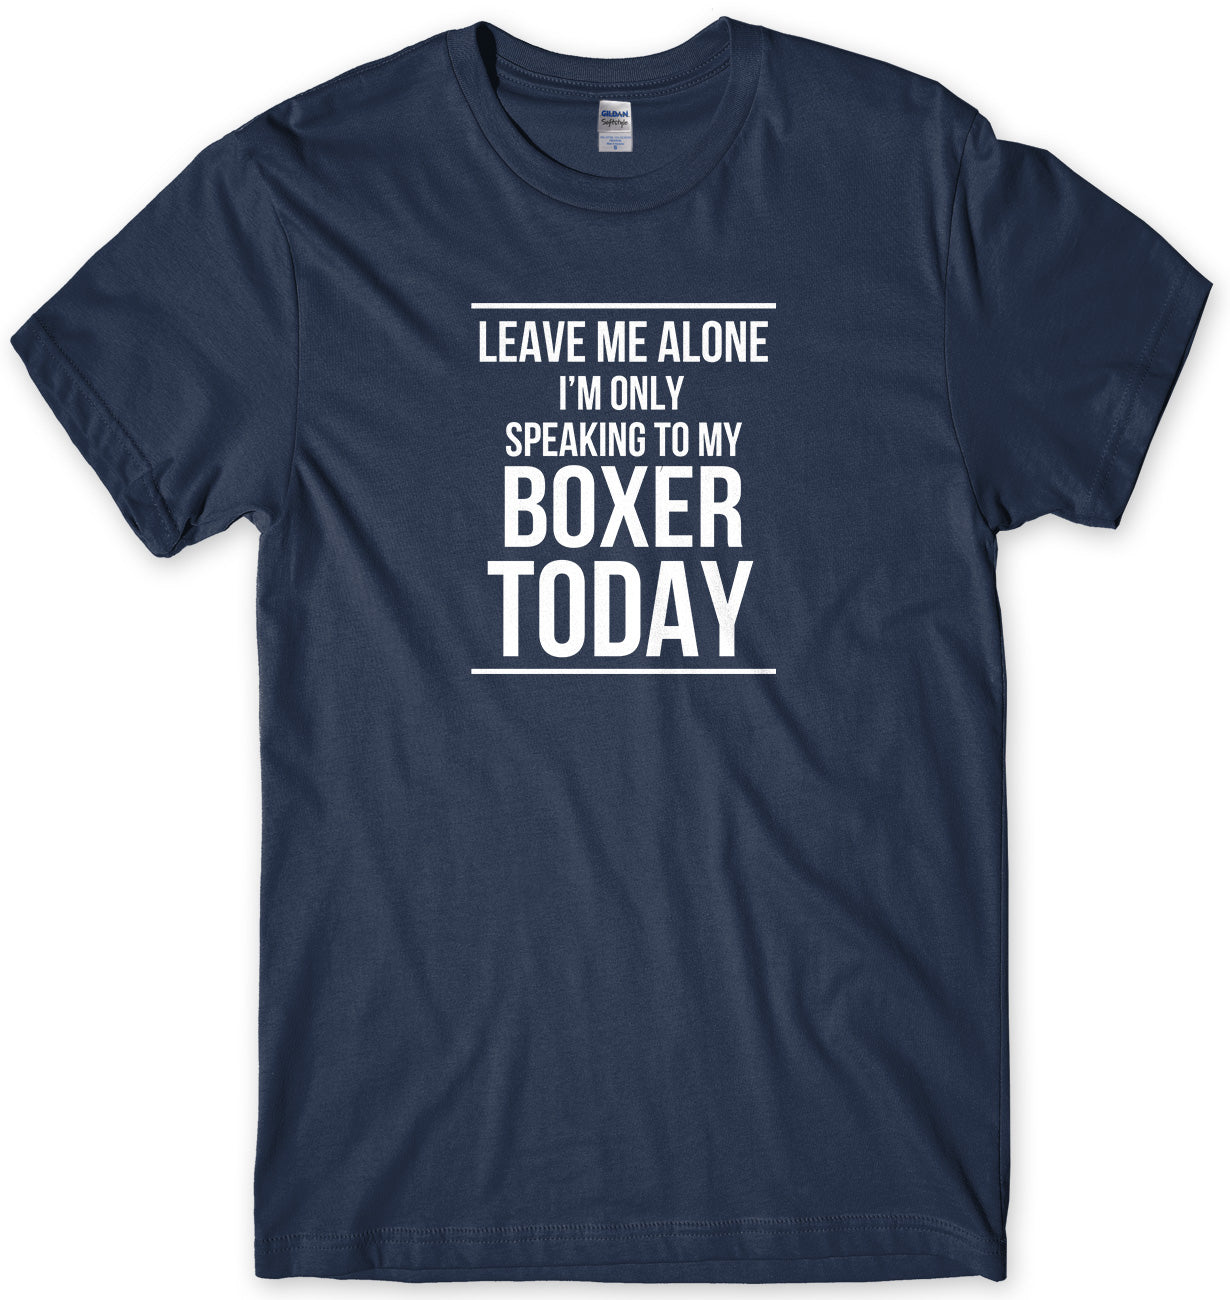 LEAVE ME ALONE I'M ONLY SPEAKING TO MY BOXER TODAY MENS FUNNY SLOGAN UNISEX T-SHIRT